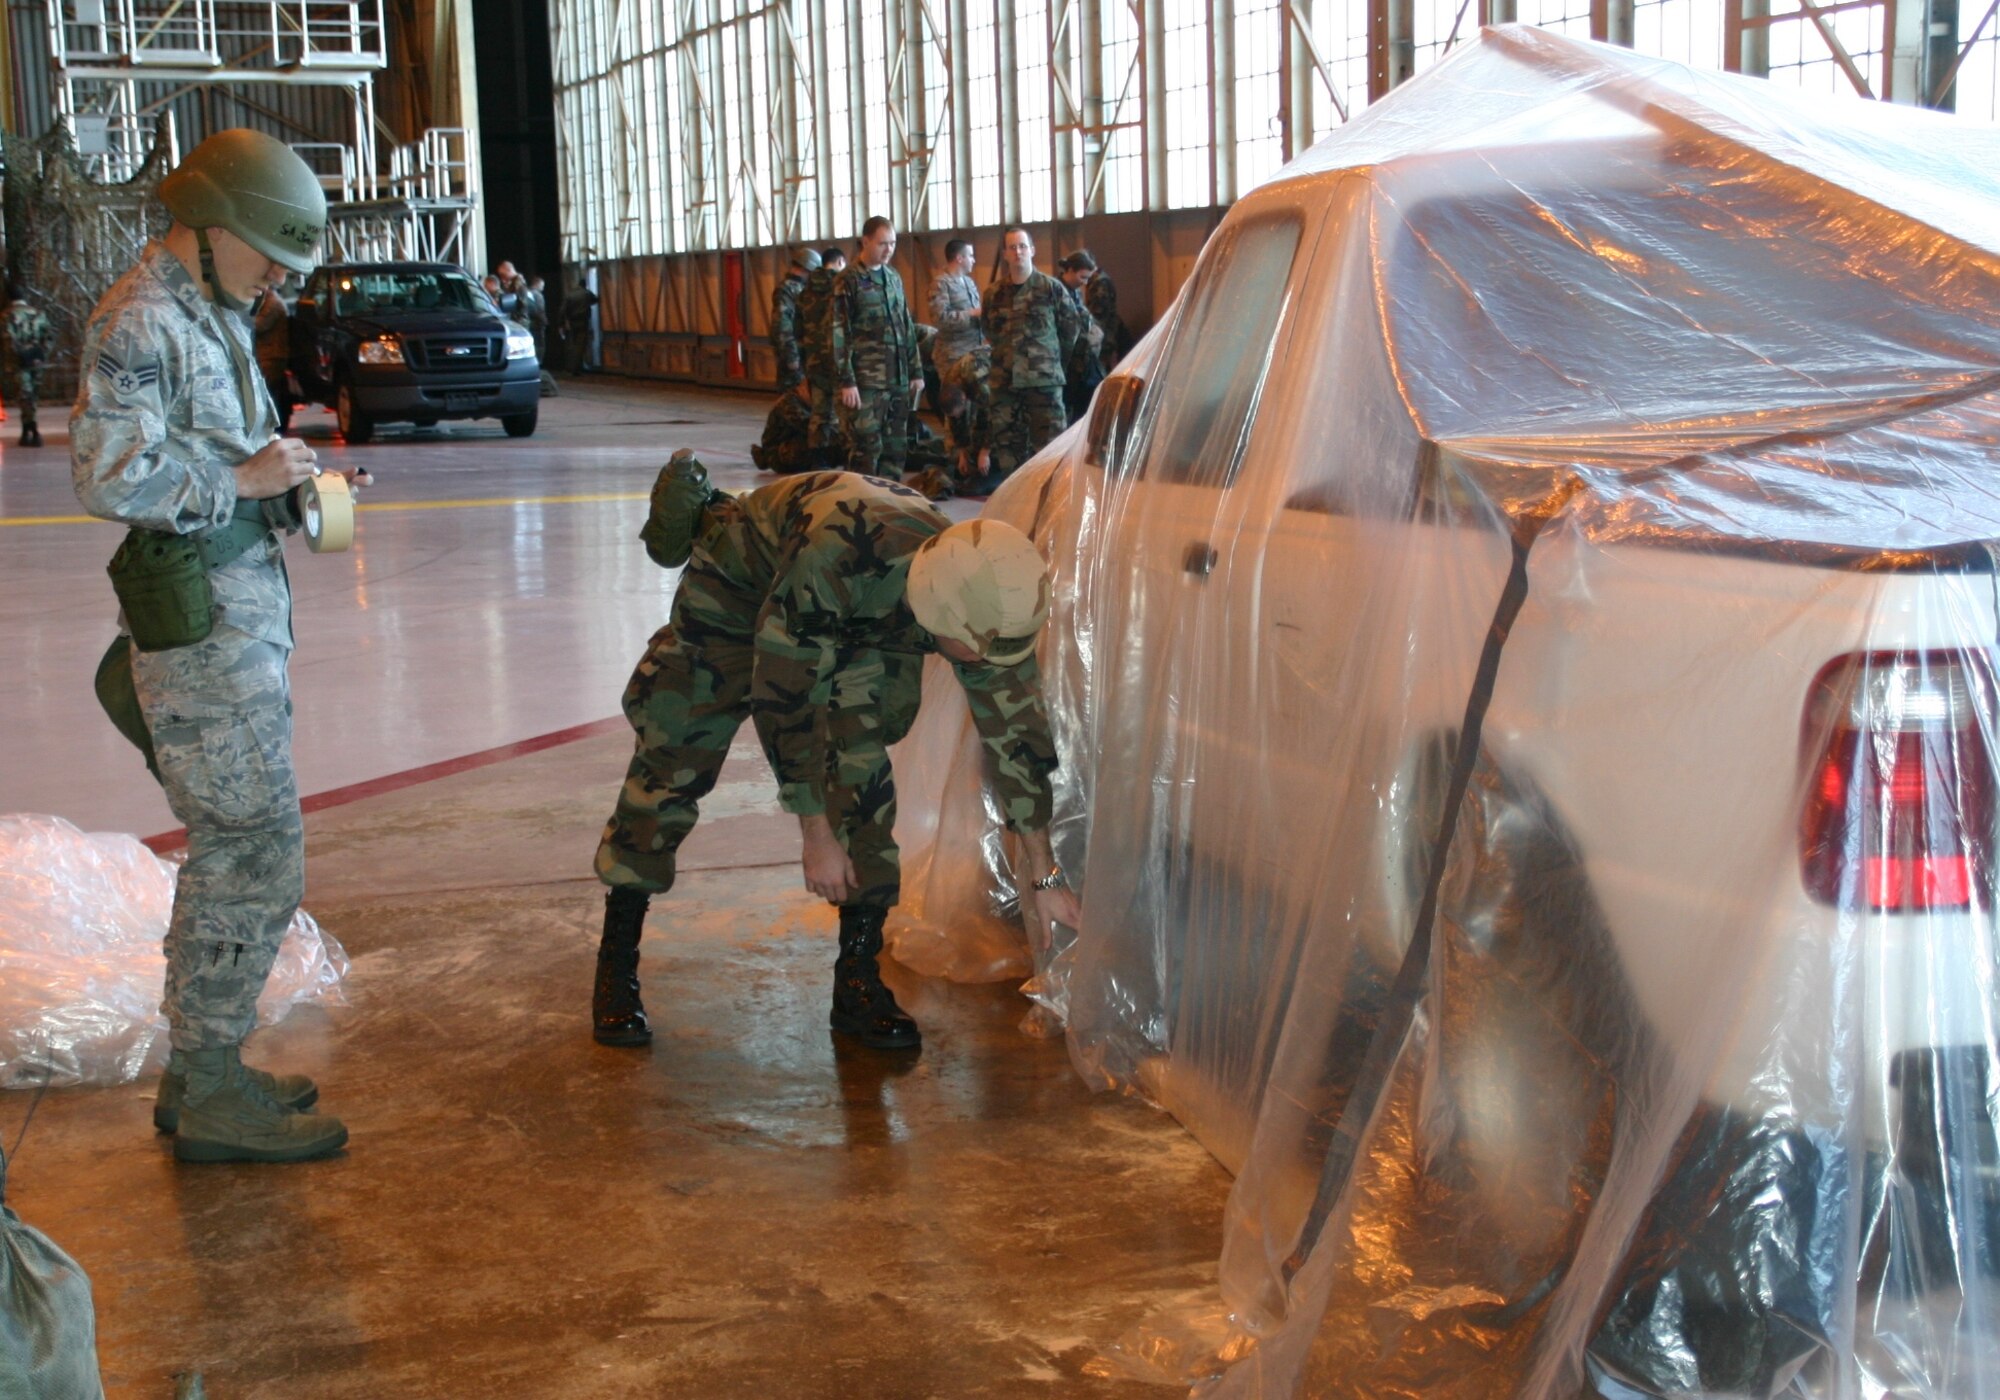 Airmen are hard at work at the Contamination Control Vehicle Covering event at the ATSO Rodeo Jan. 30.